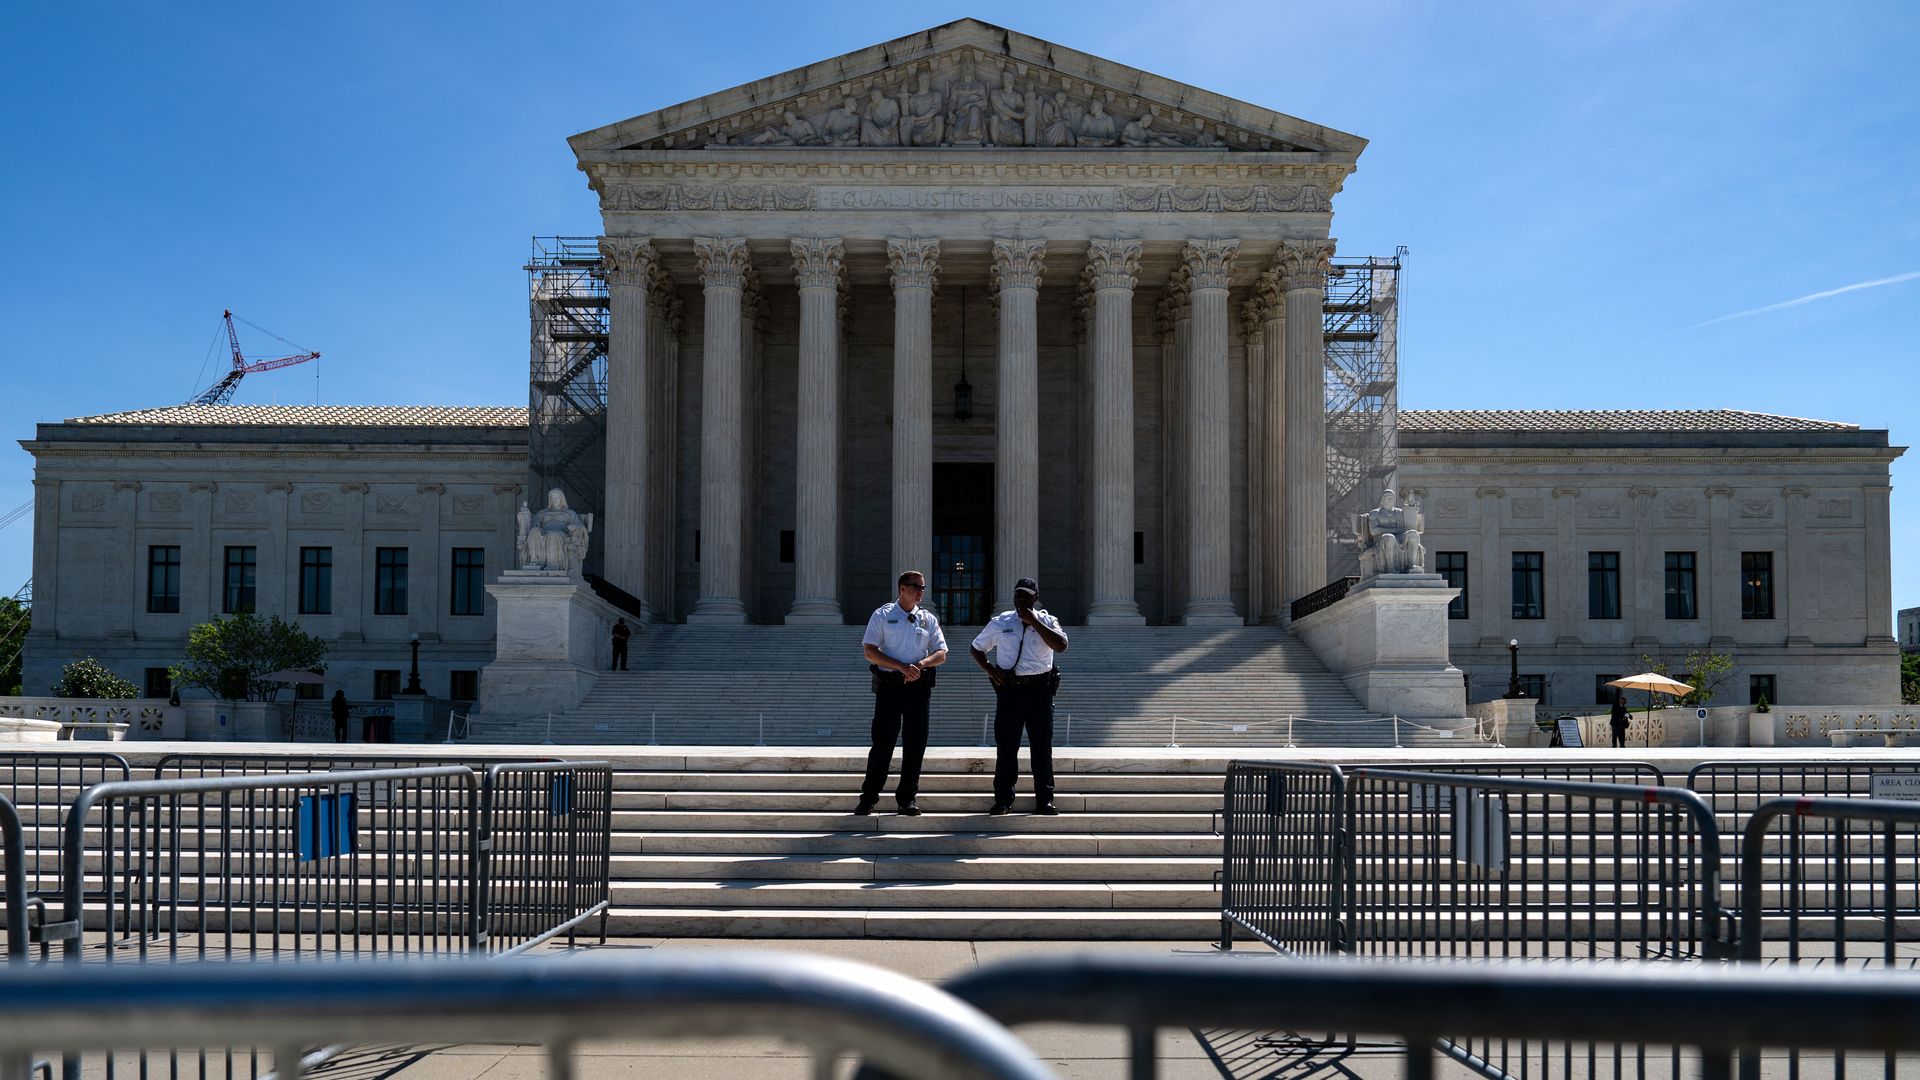 Two officers stand in front of the Supreme Court, a building with columns in the front. The sky is blue in the background. Some metal gates are in the foreground.